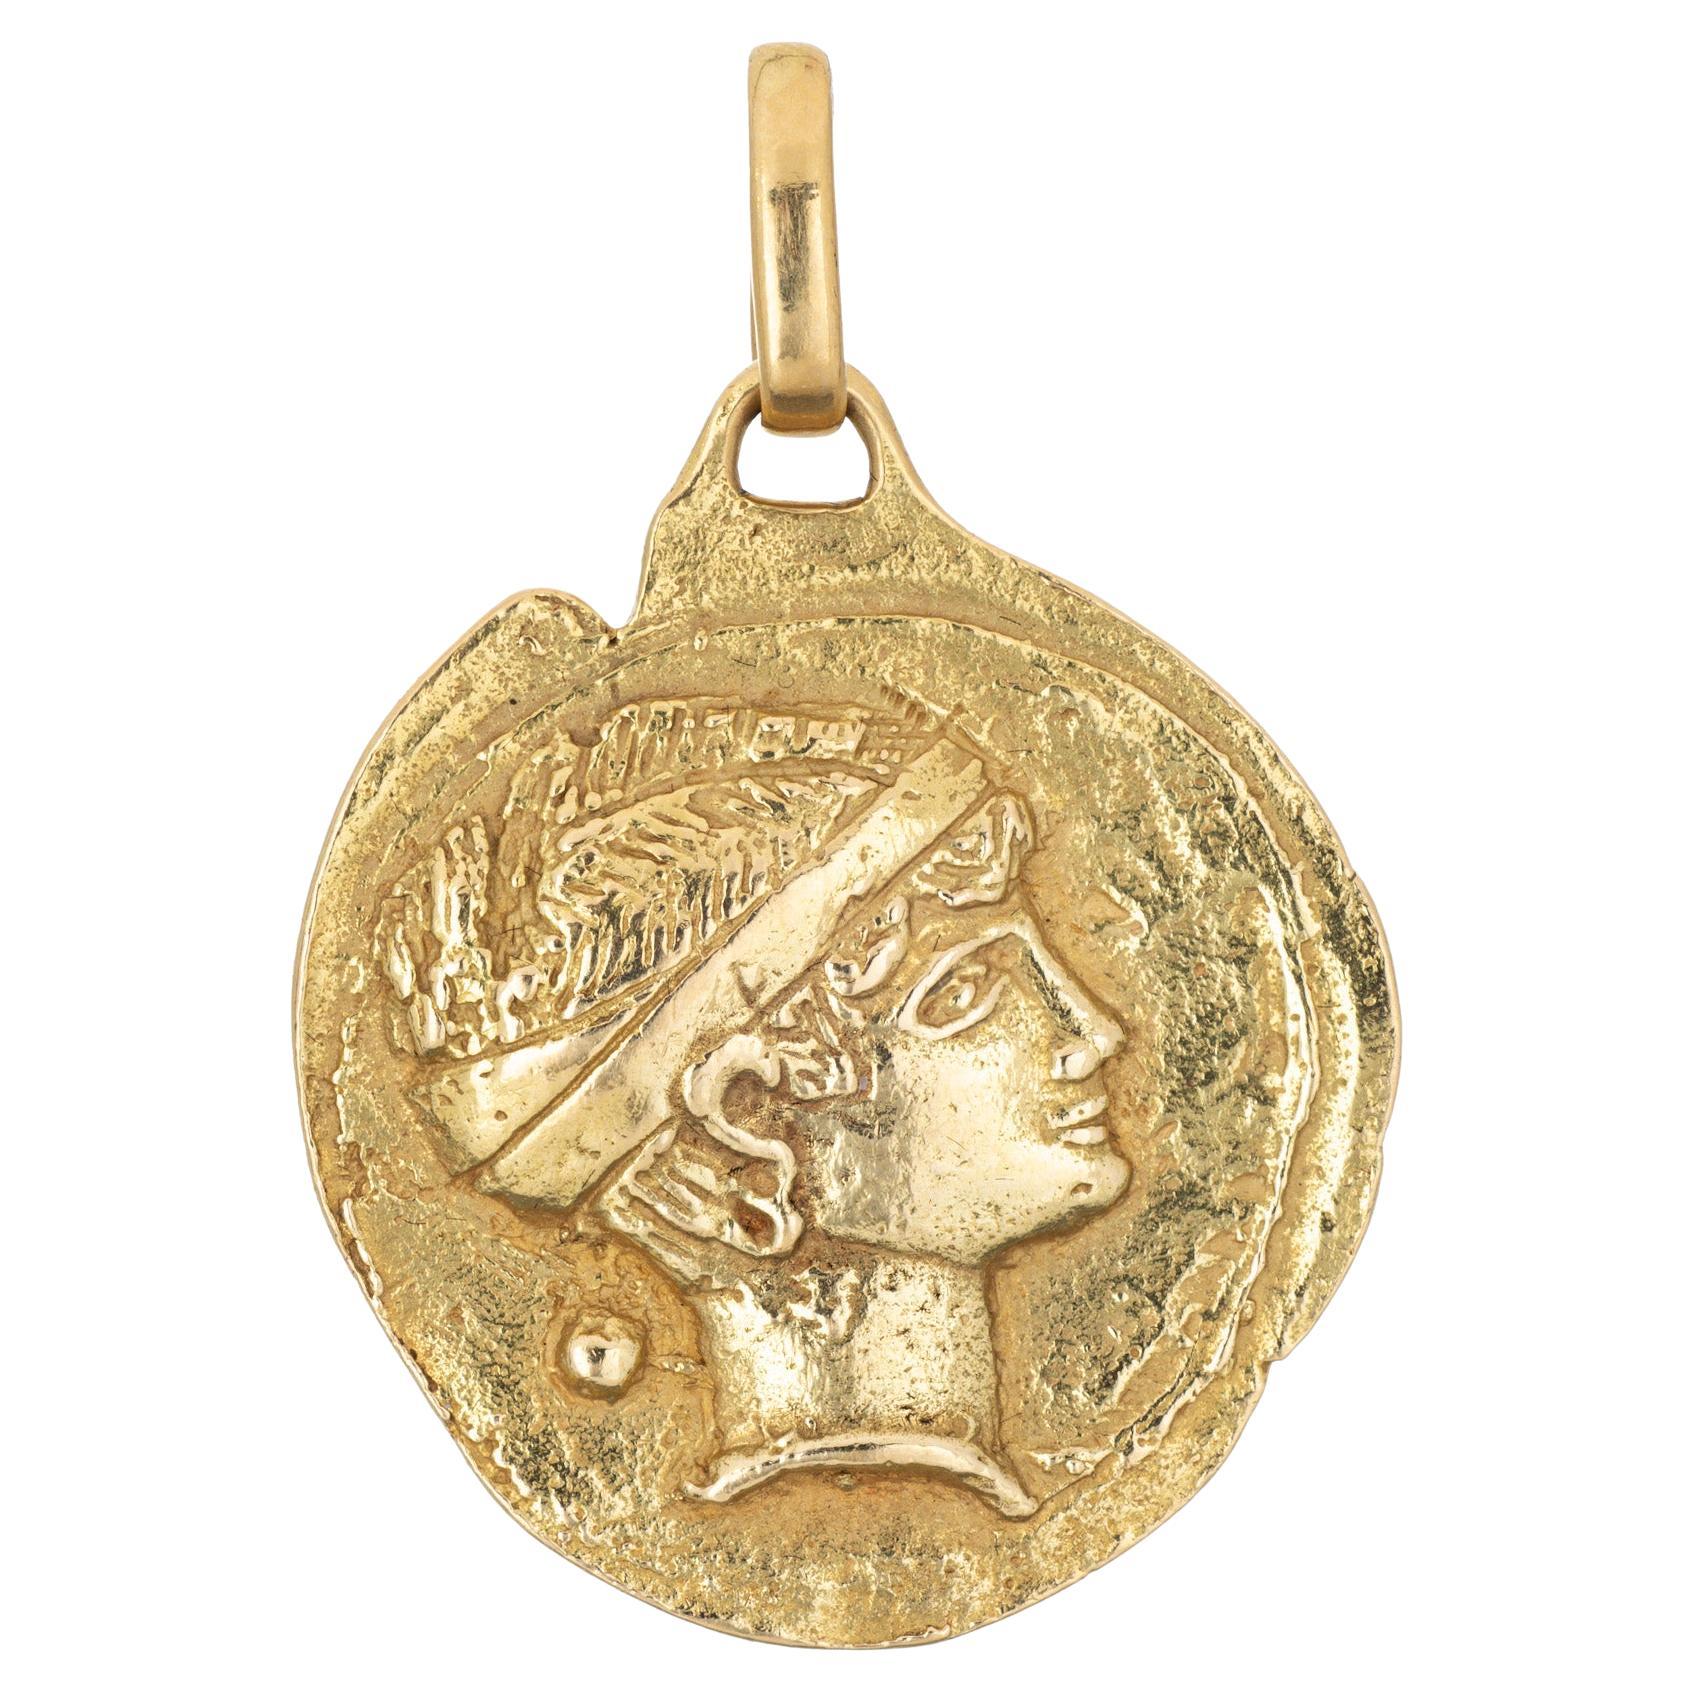 Vintage 70s Tiffany & Co Pendant Bust of Caesar 18k Yellow Gold Medallion For Sale